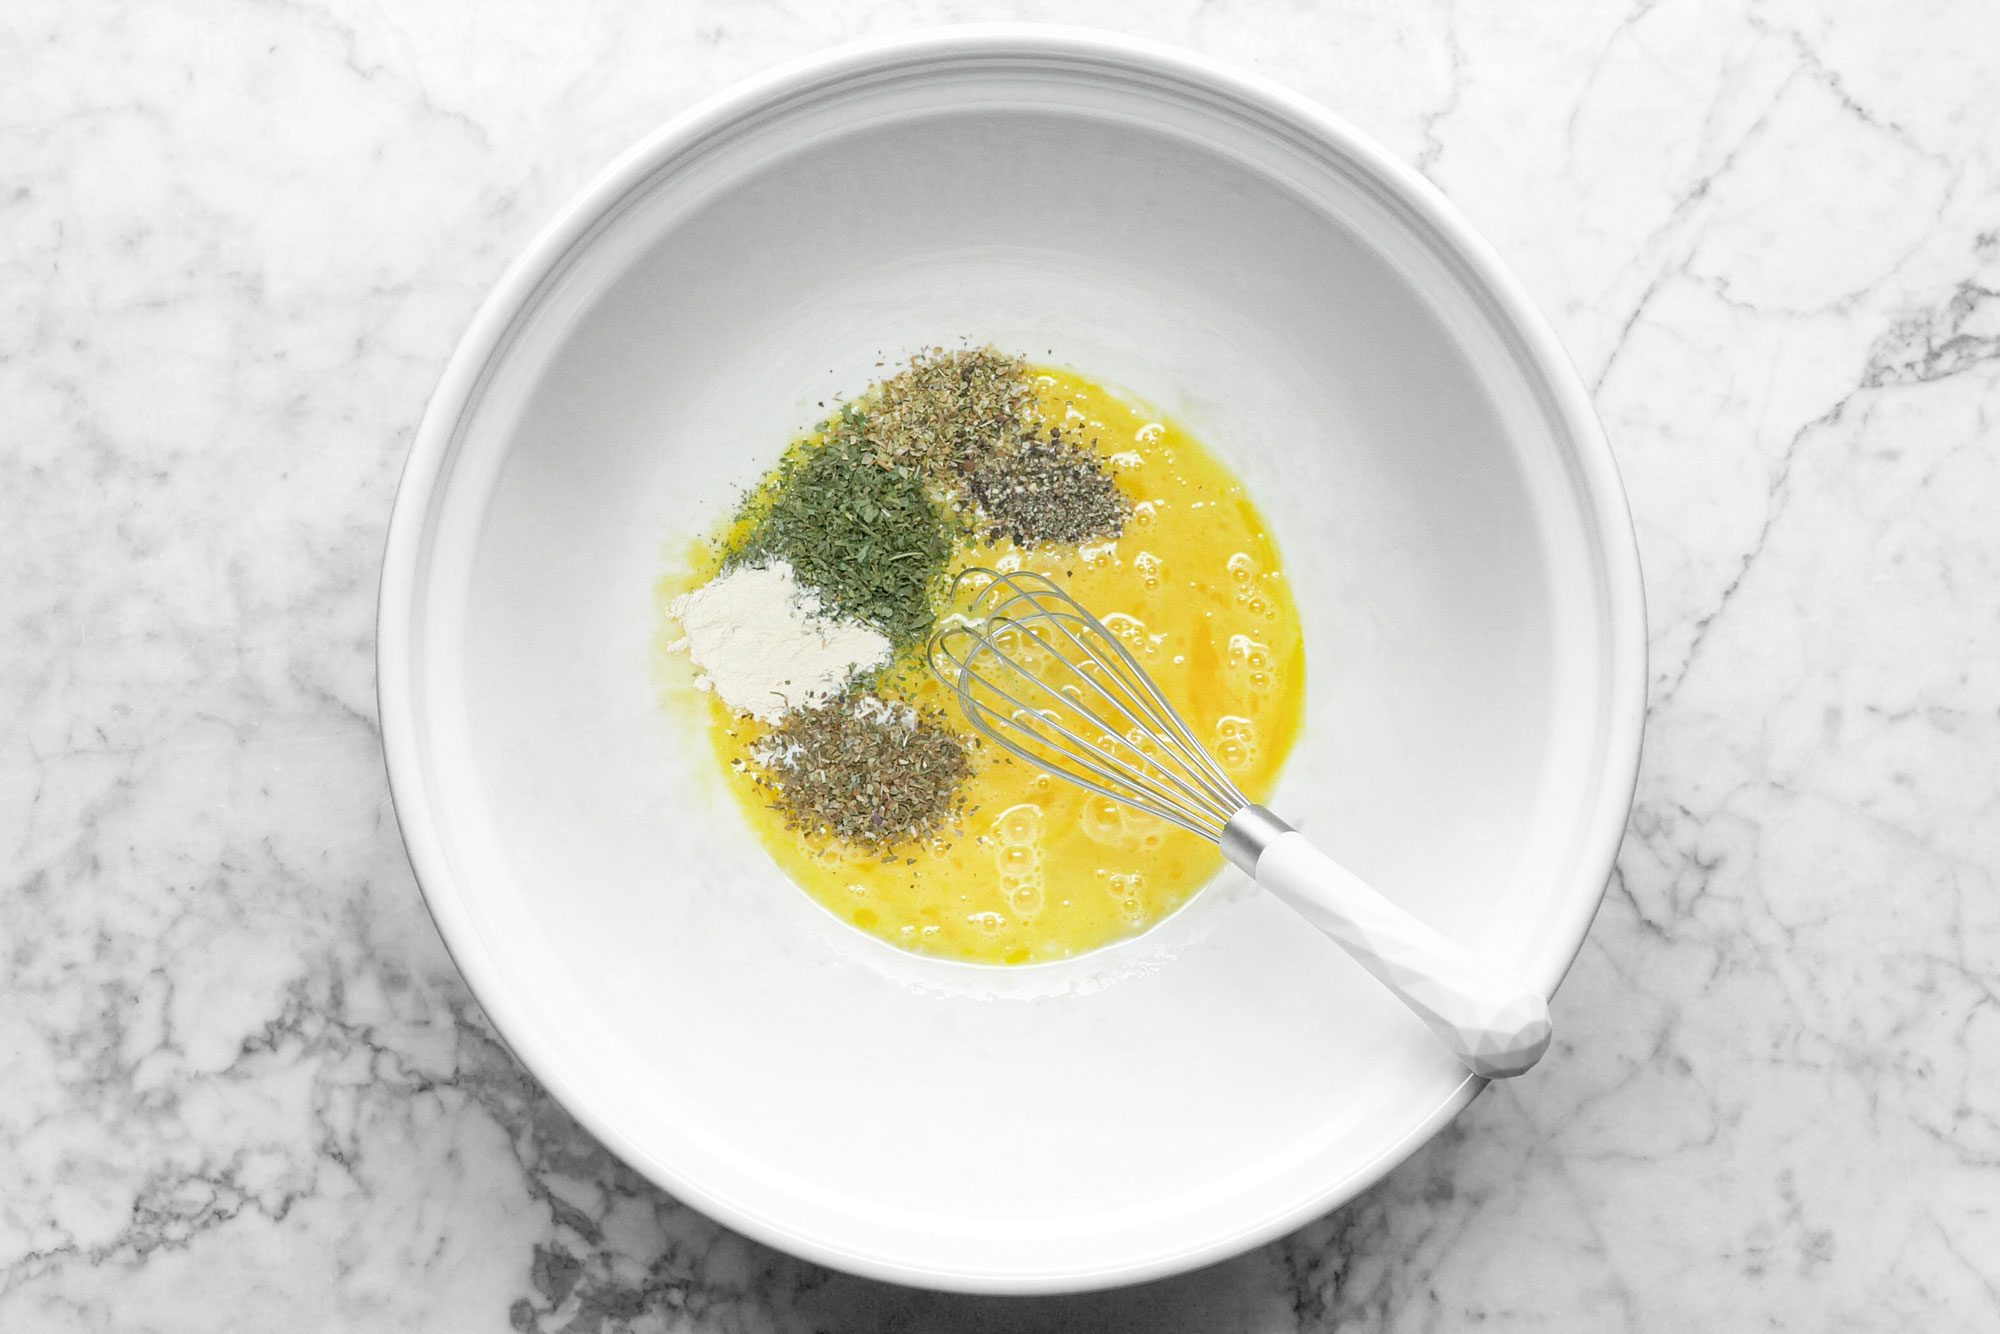 egg, parsley, salt, garlic powder, oregano and pepper in a large white ceramic bowl with a whisk on marble surface